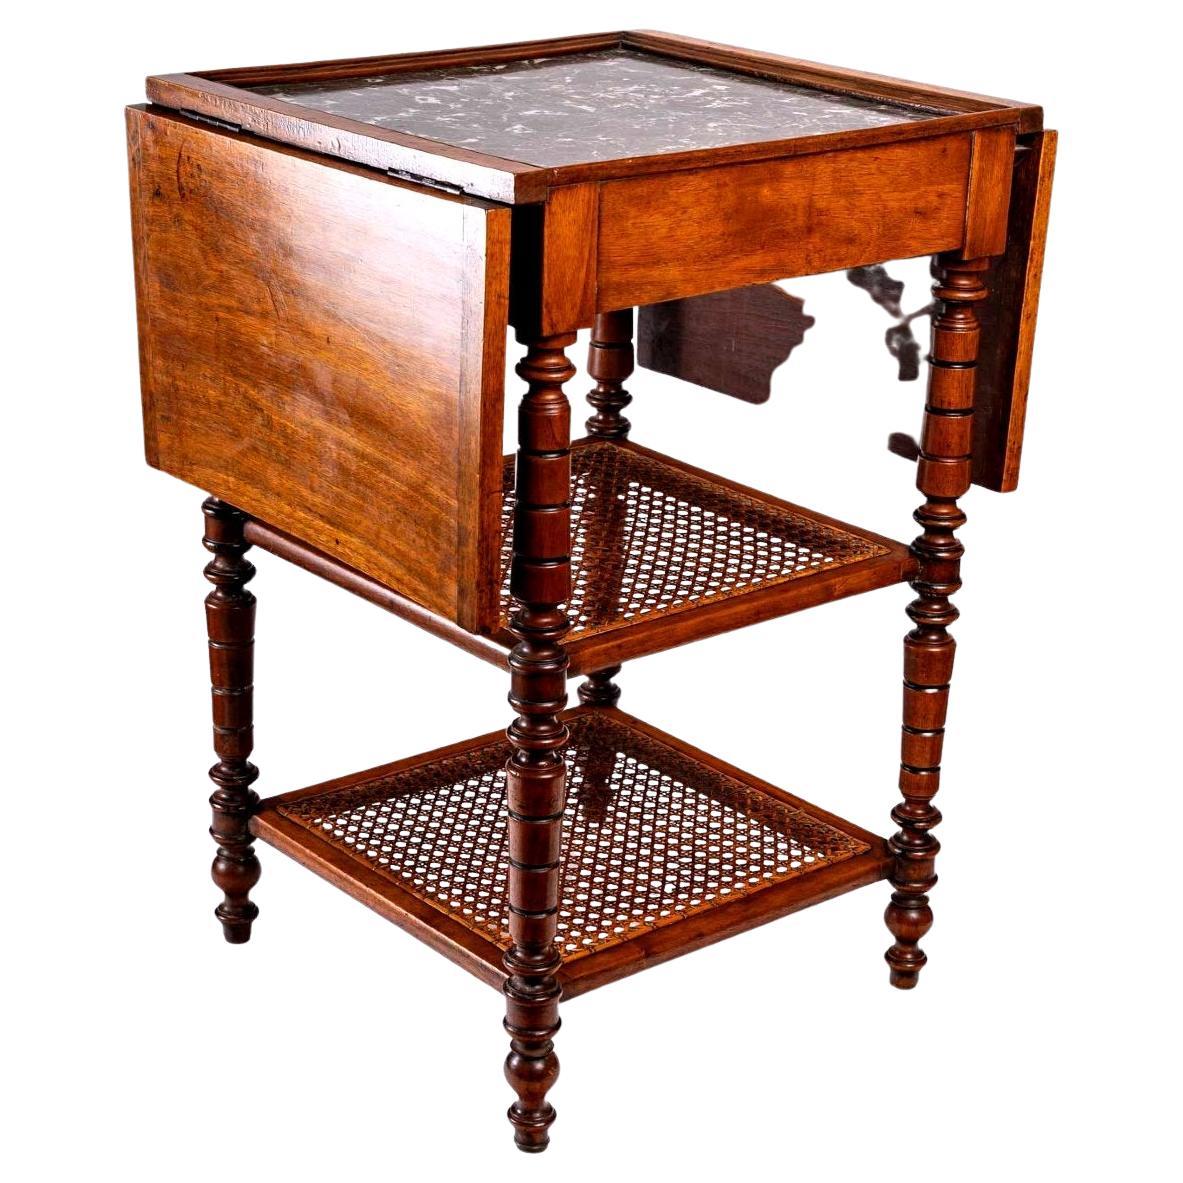 Mahogany table - pedestal table with shutters - 19th Century 